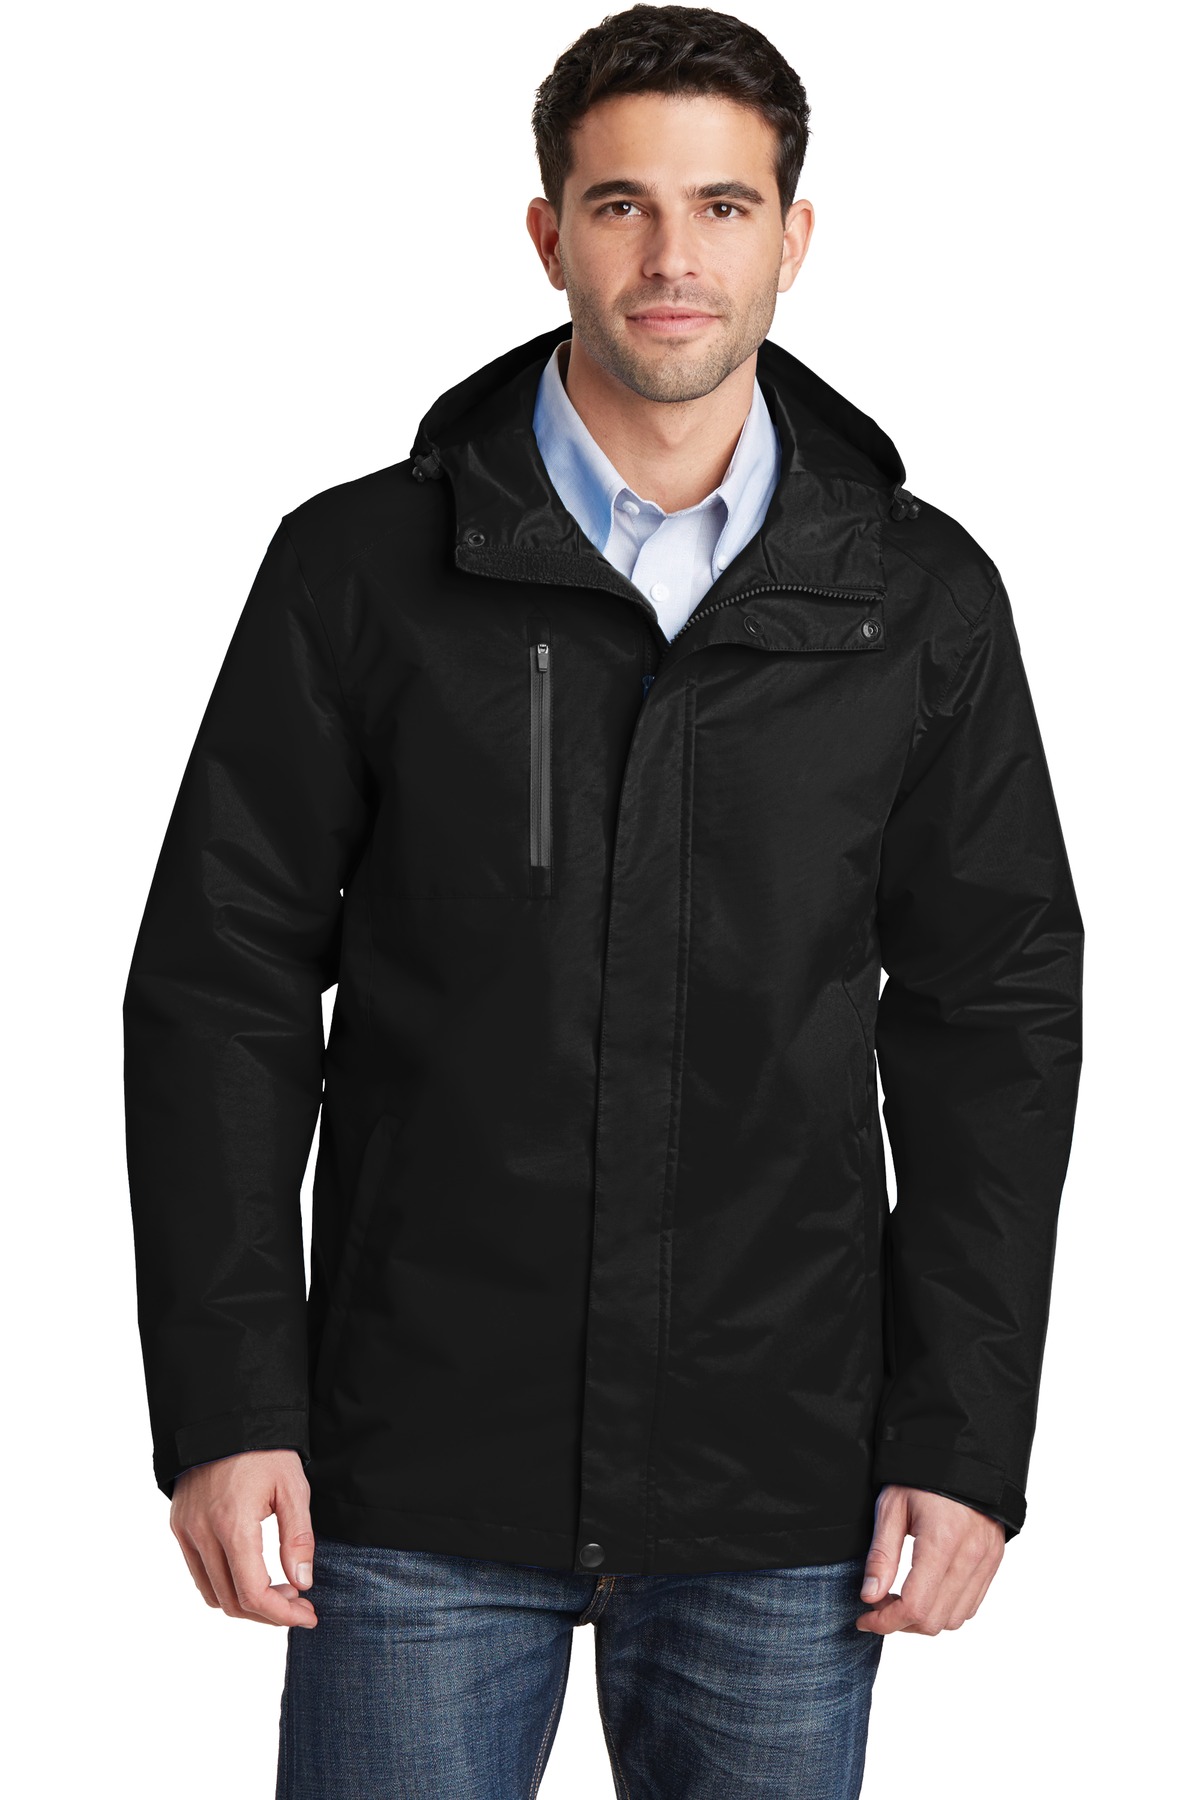 Port Authority All-Conditions Jacket-